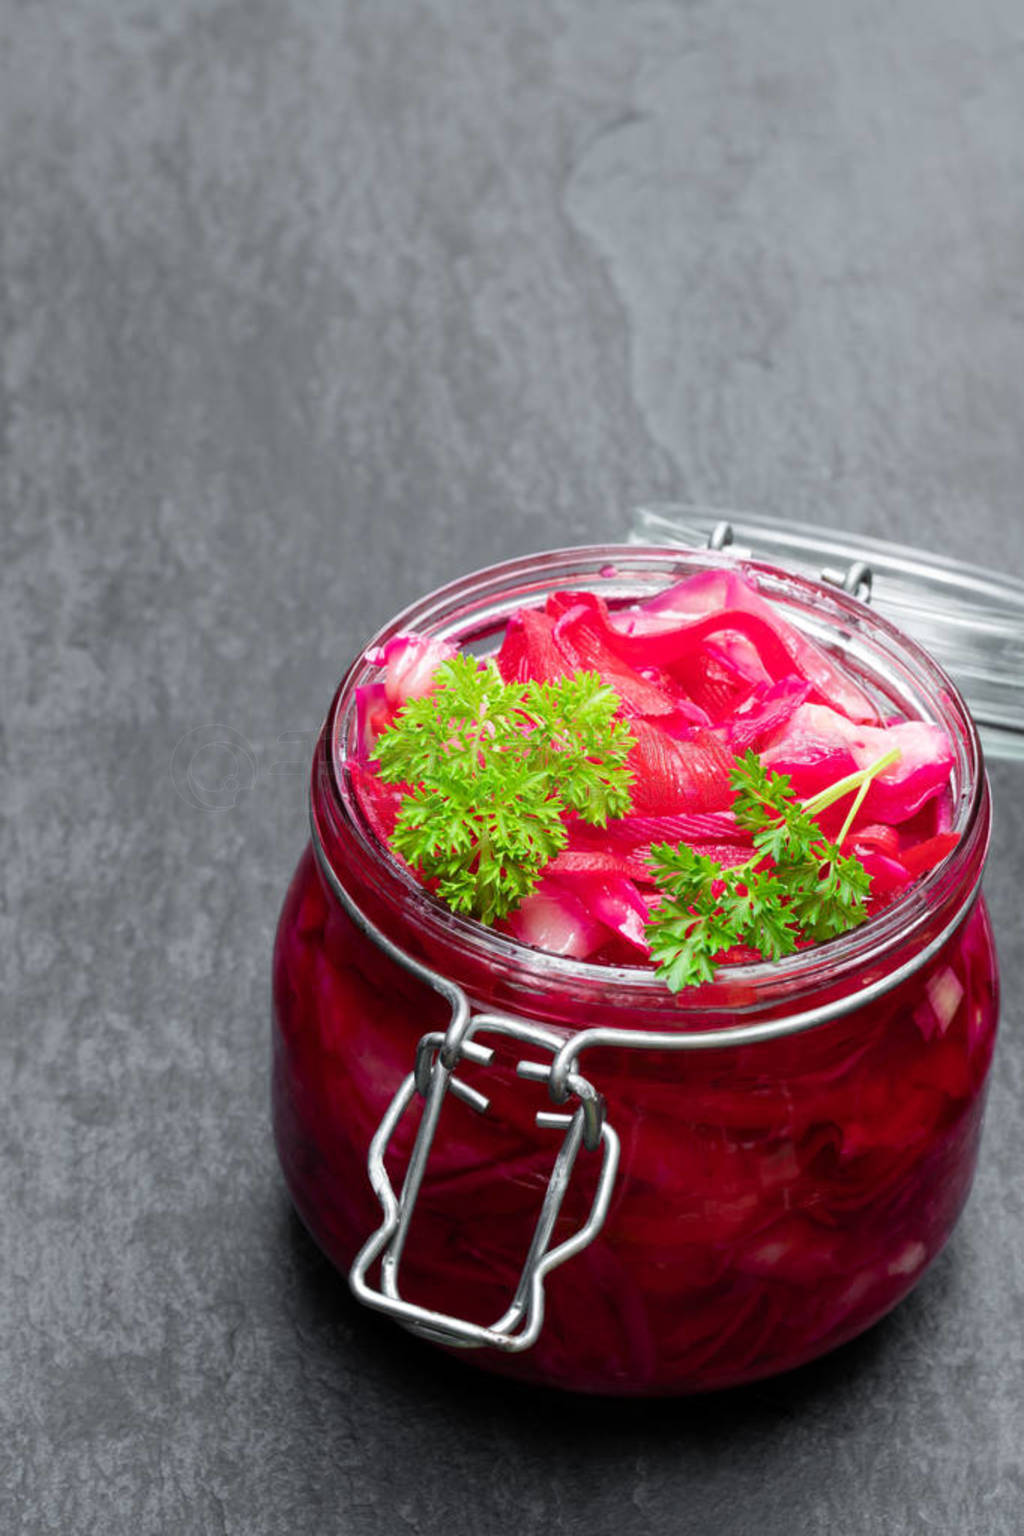 Salad with cabbage and beetroot in glass jar on black stone back